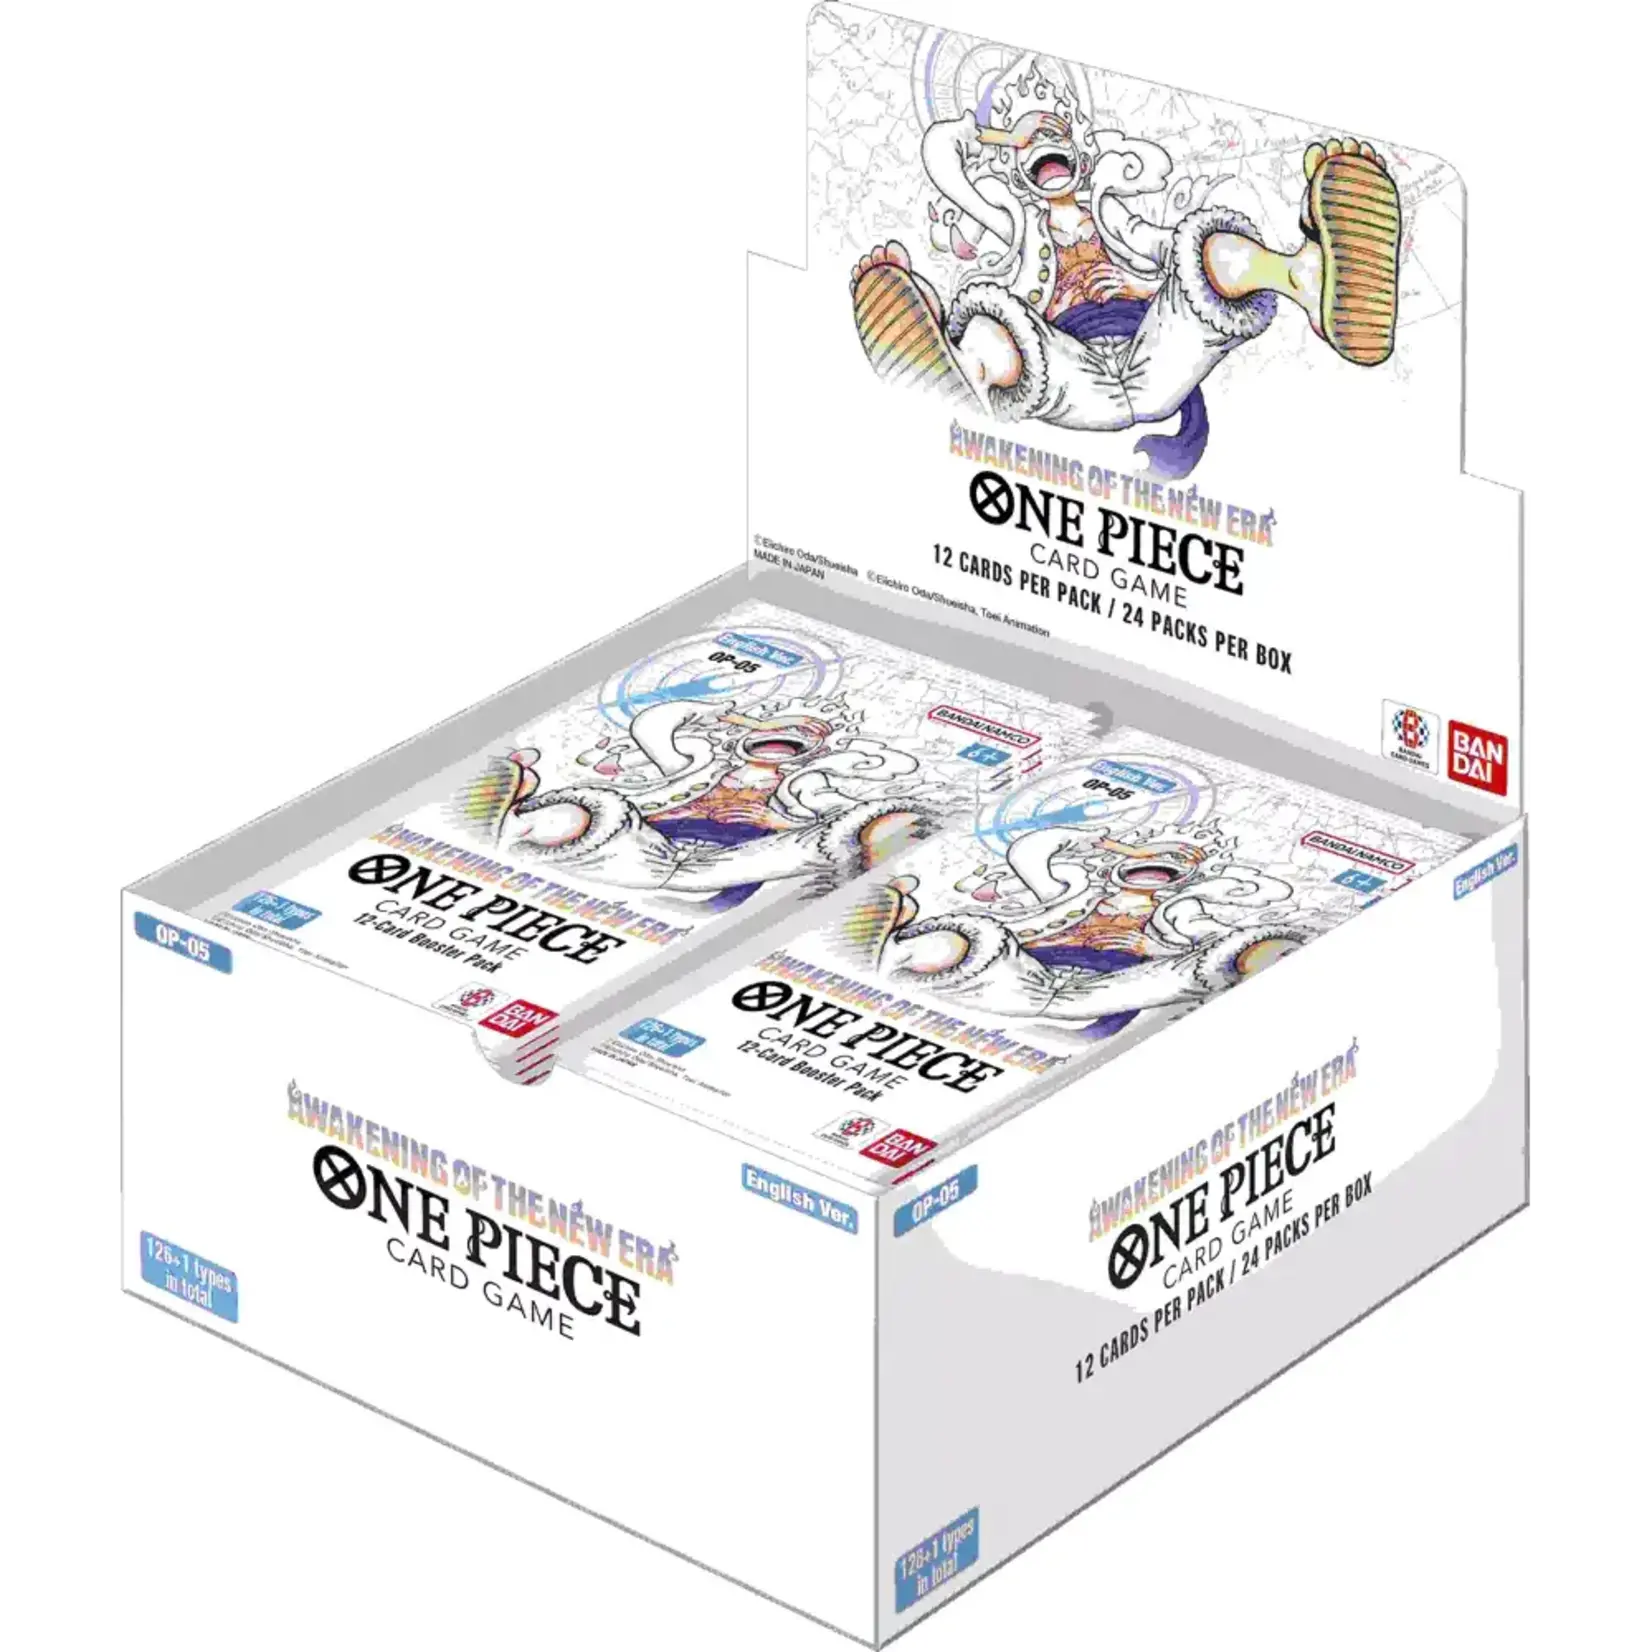 One Piece Card Game One Piece TCG - Awakening of the New Era Boosterbox